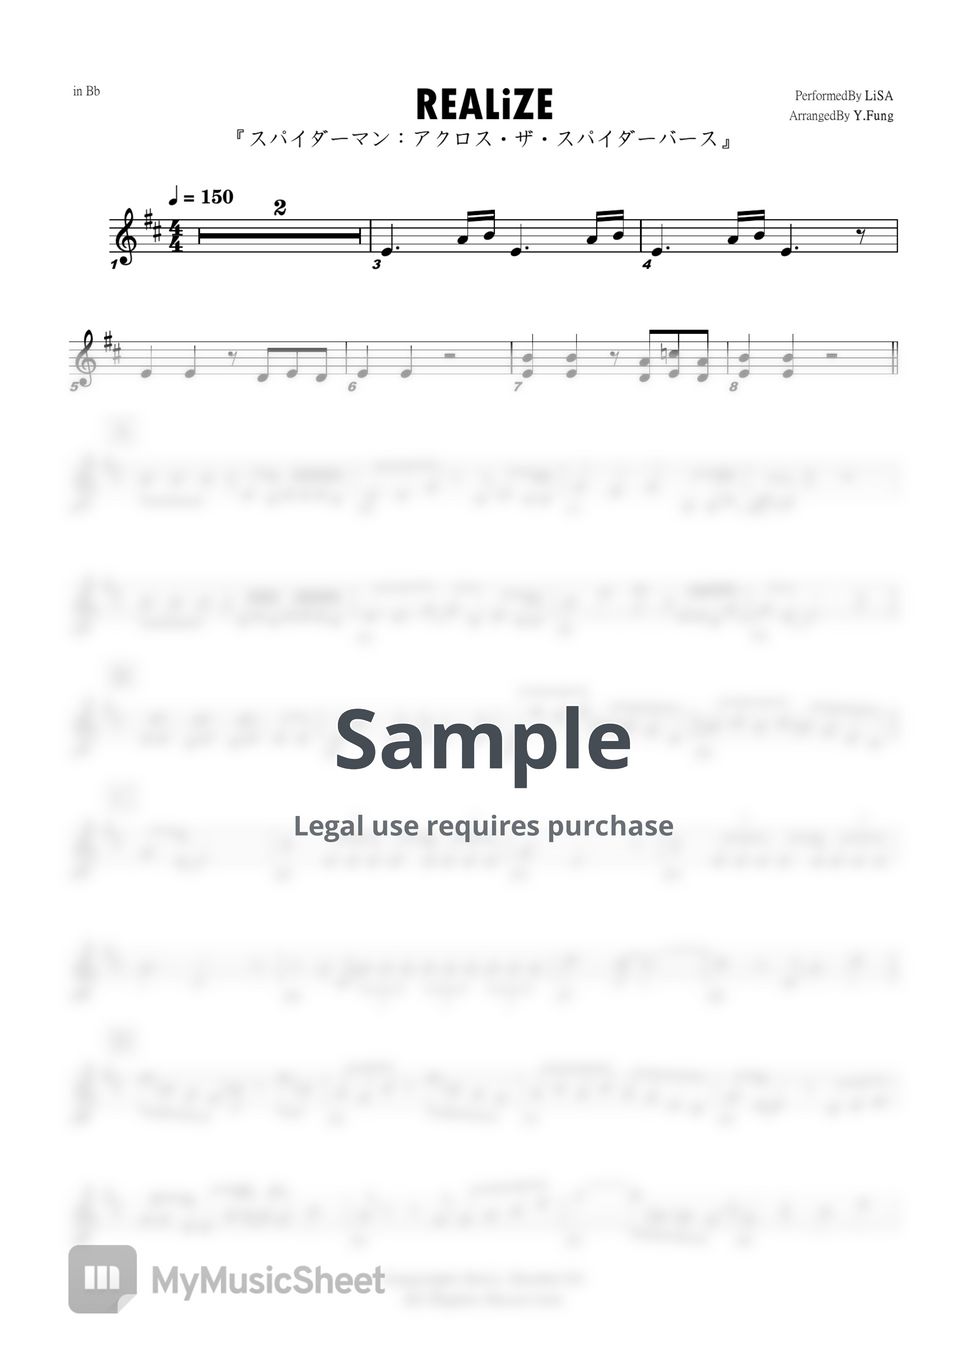 LiSA - REALiZE (C/ Bb/ F/ Eb Solo Sheet Music) by FungYip